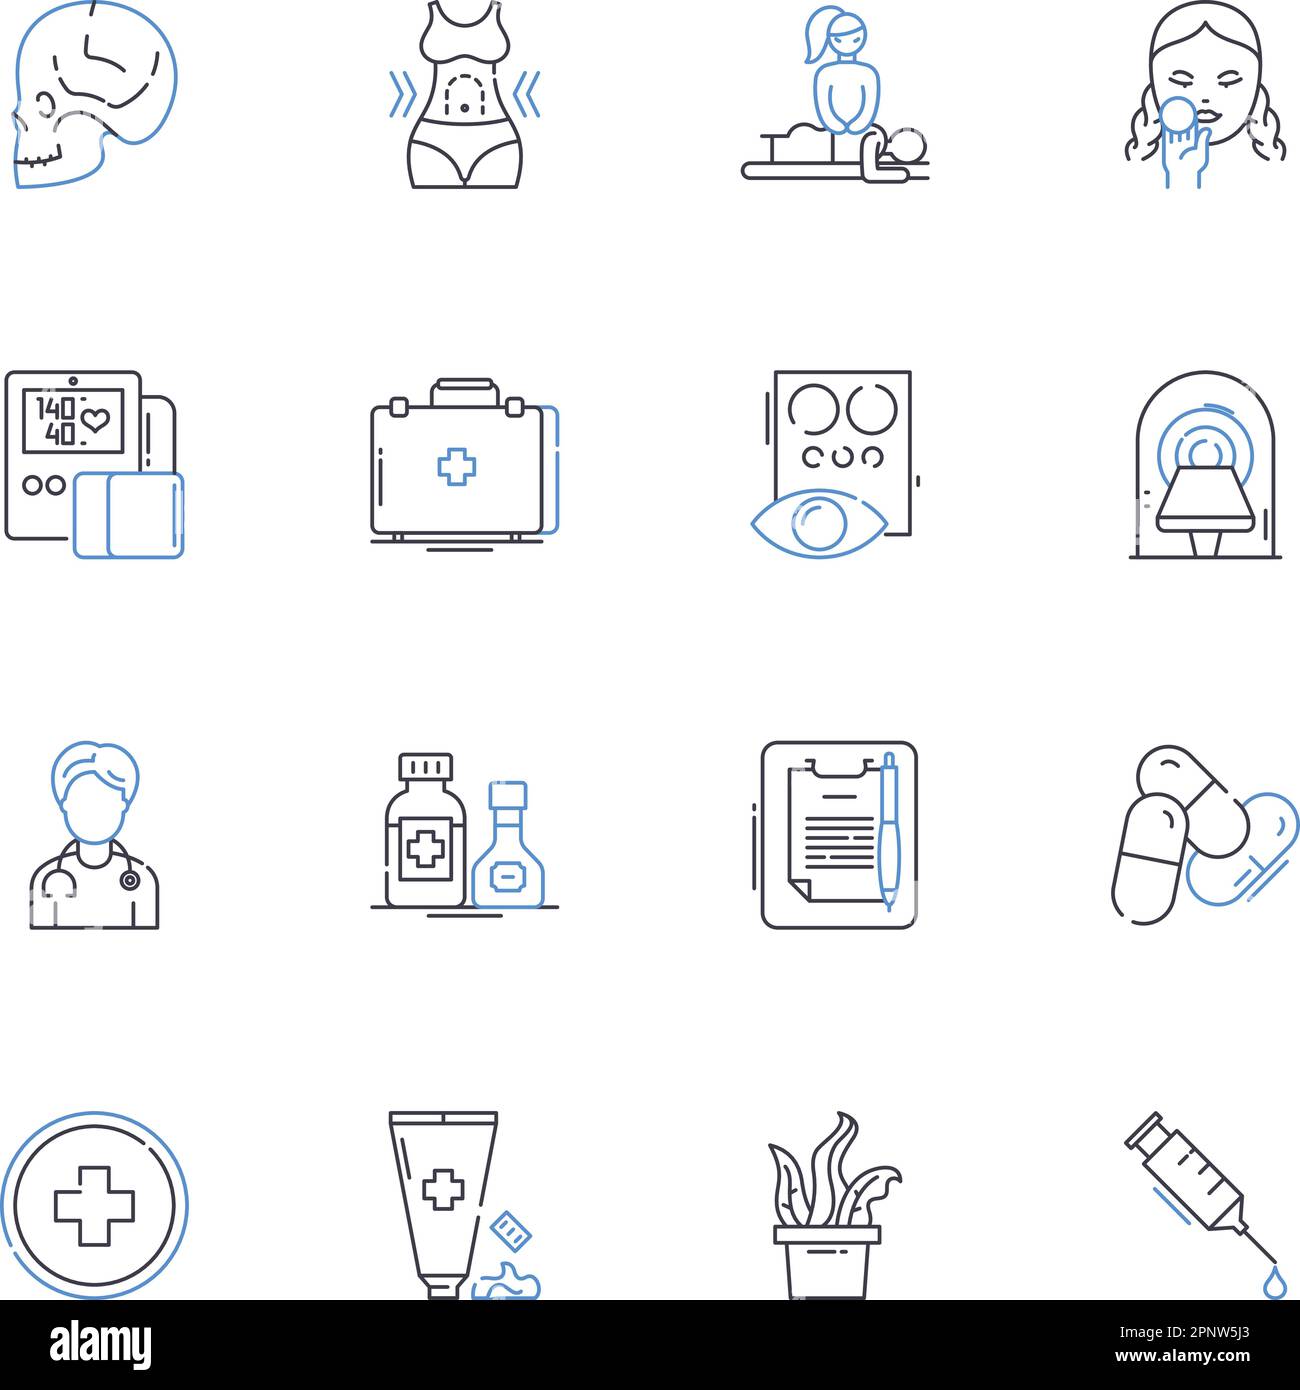 Radiology line icons collection. X-ray, Imaging, Ultrasound, MRI, CT, Fluoroscopy, Mammography vector and linear illustration. Radiography,Nuclear Stock Vector